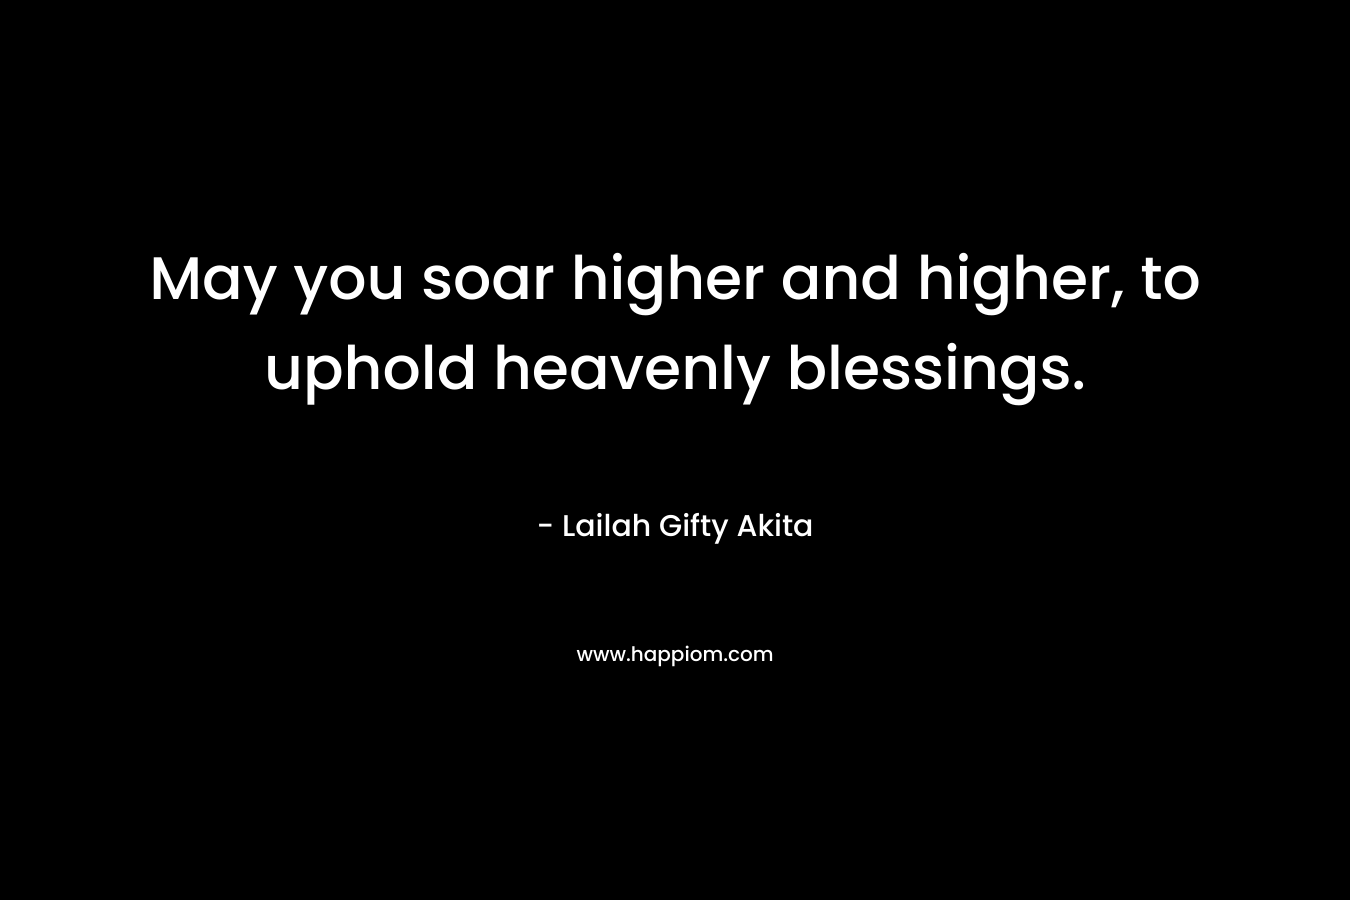 May you soar higher and higher, to uphold heavenly blessings. – Lailah Gifty Akita